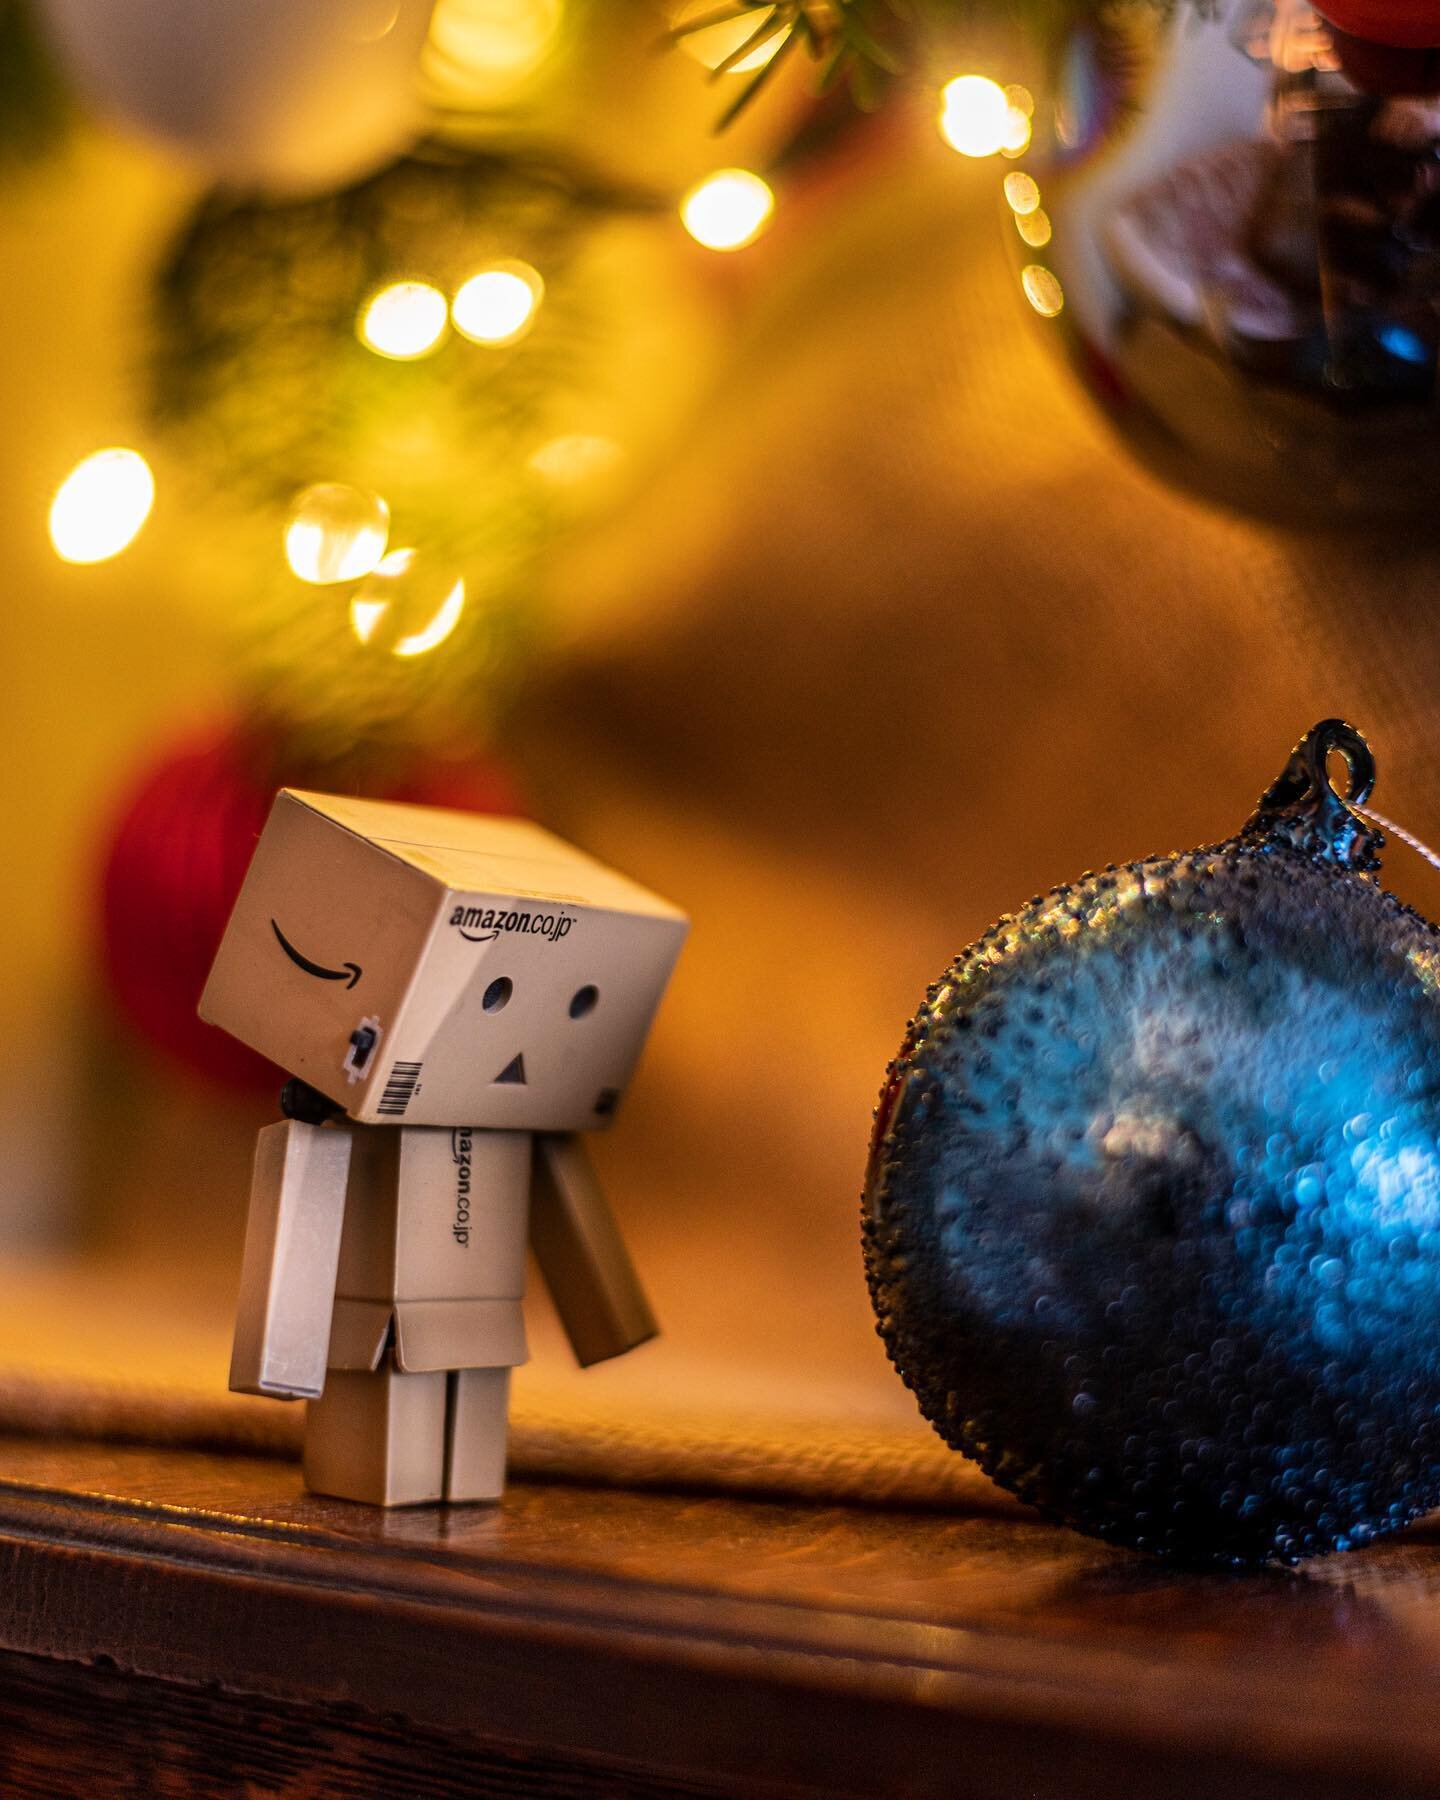 Danbo wants to know why all the Christmas decorations have to come down today. Danbo thought they were a shining light in a world of dark...
&bull;
&bull;
&bull;
&bull;
&bull;
#christmastree #christmas #happynewyear #merrychristmas #newyear #decorati